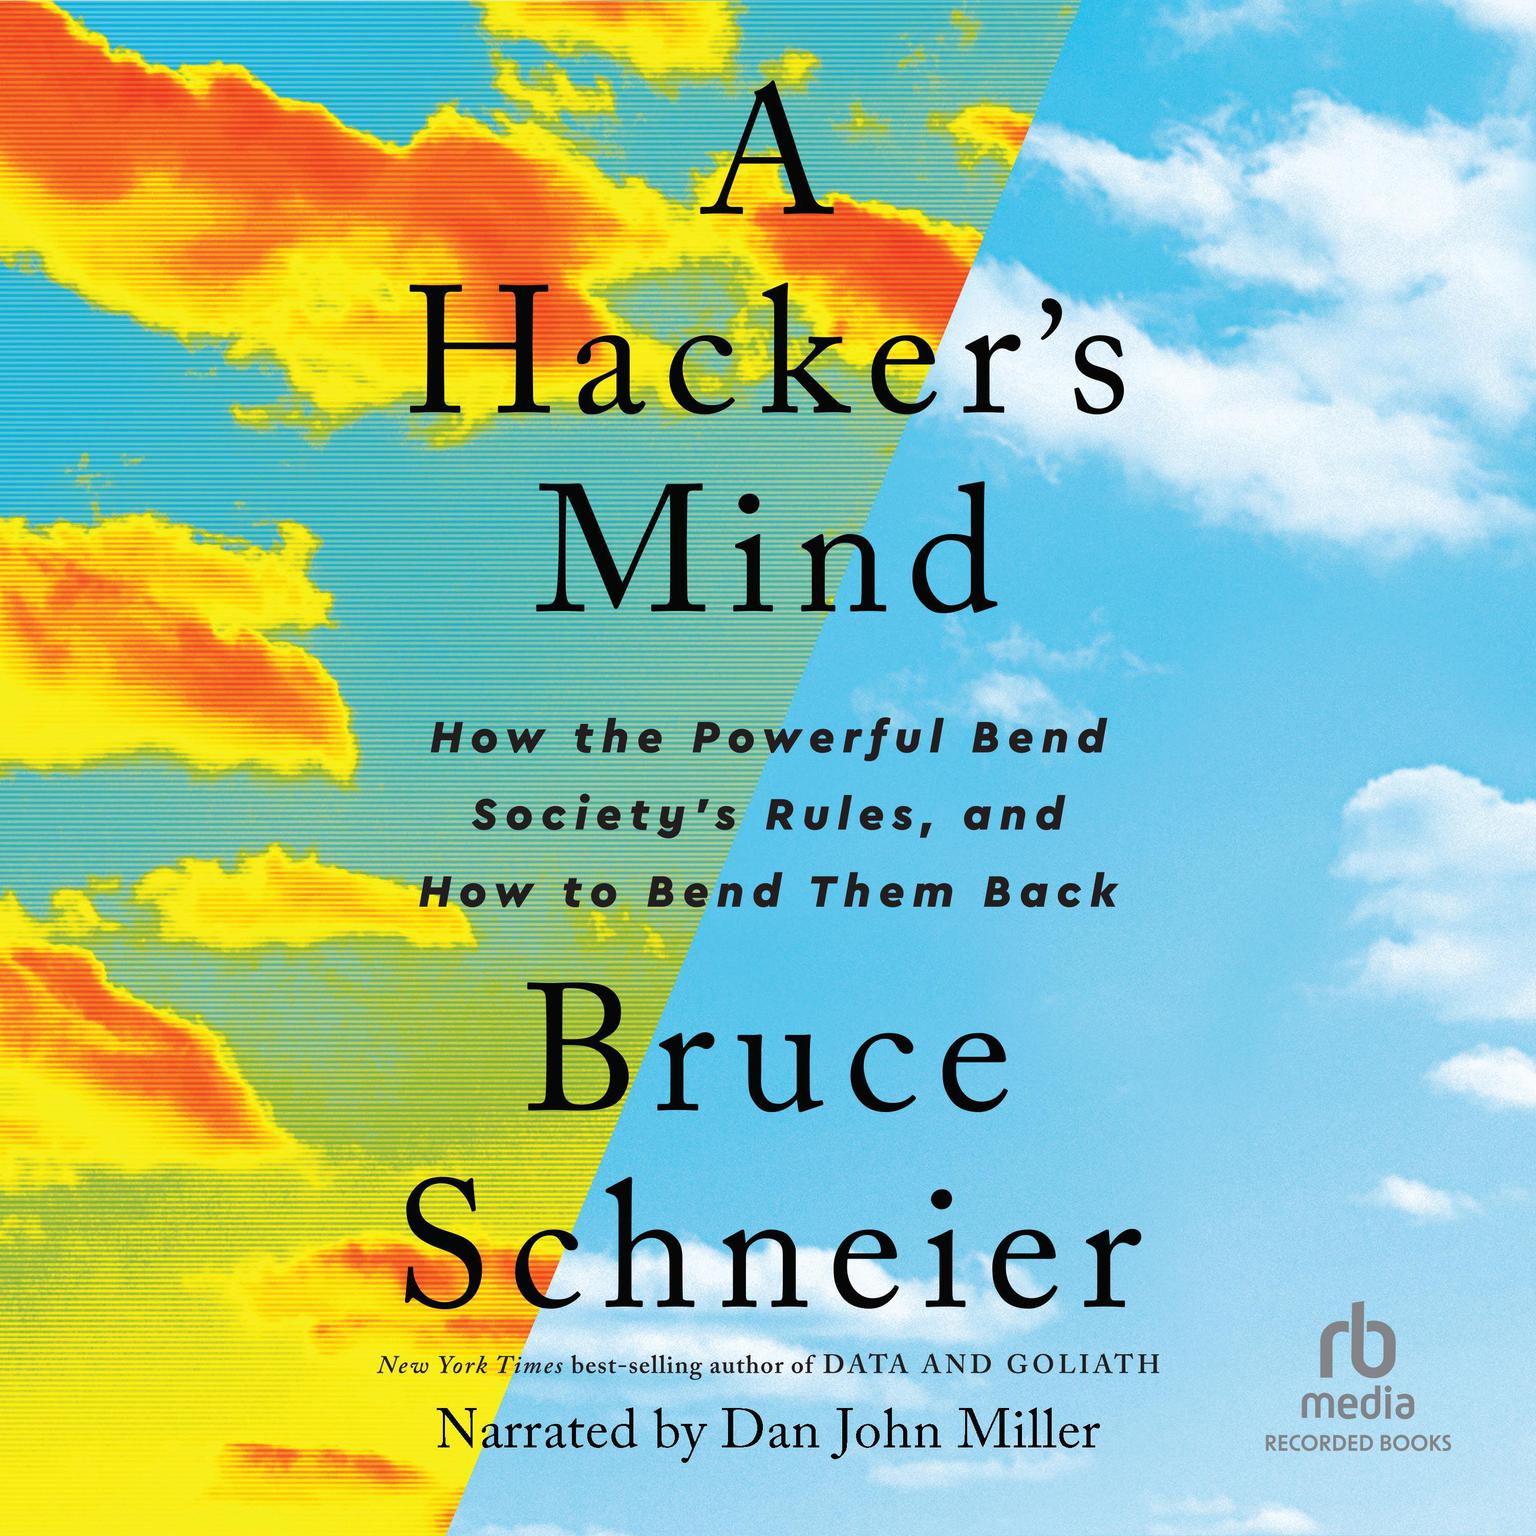 A Hackers Mind: How the Powerful Bend Societys Rules, and How to Bend them Back Audiobook, by Bruce Schneier